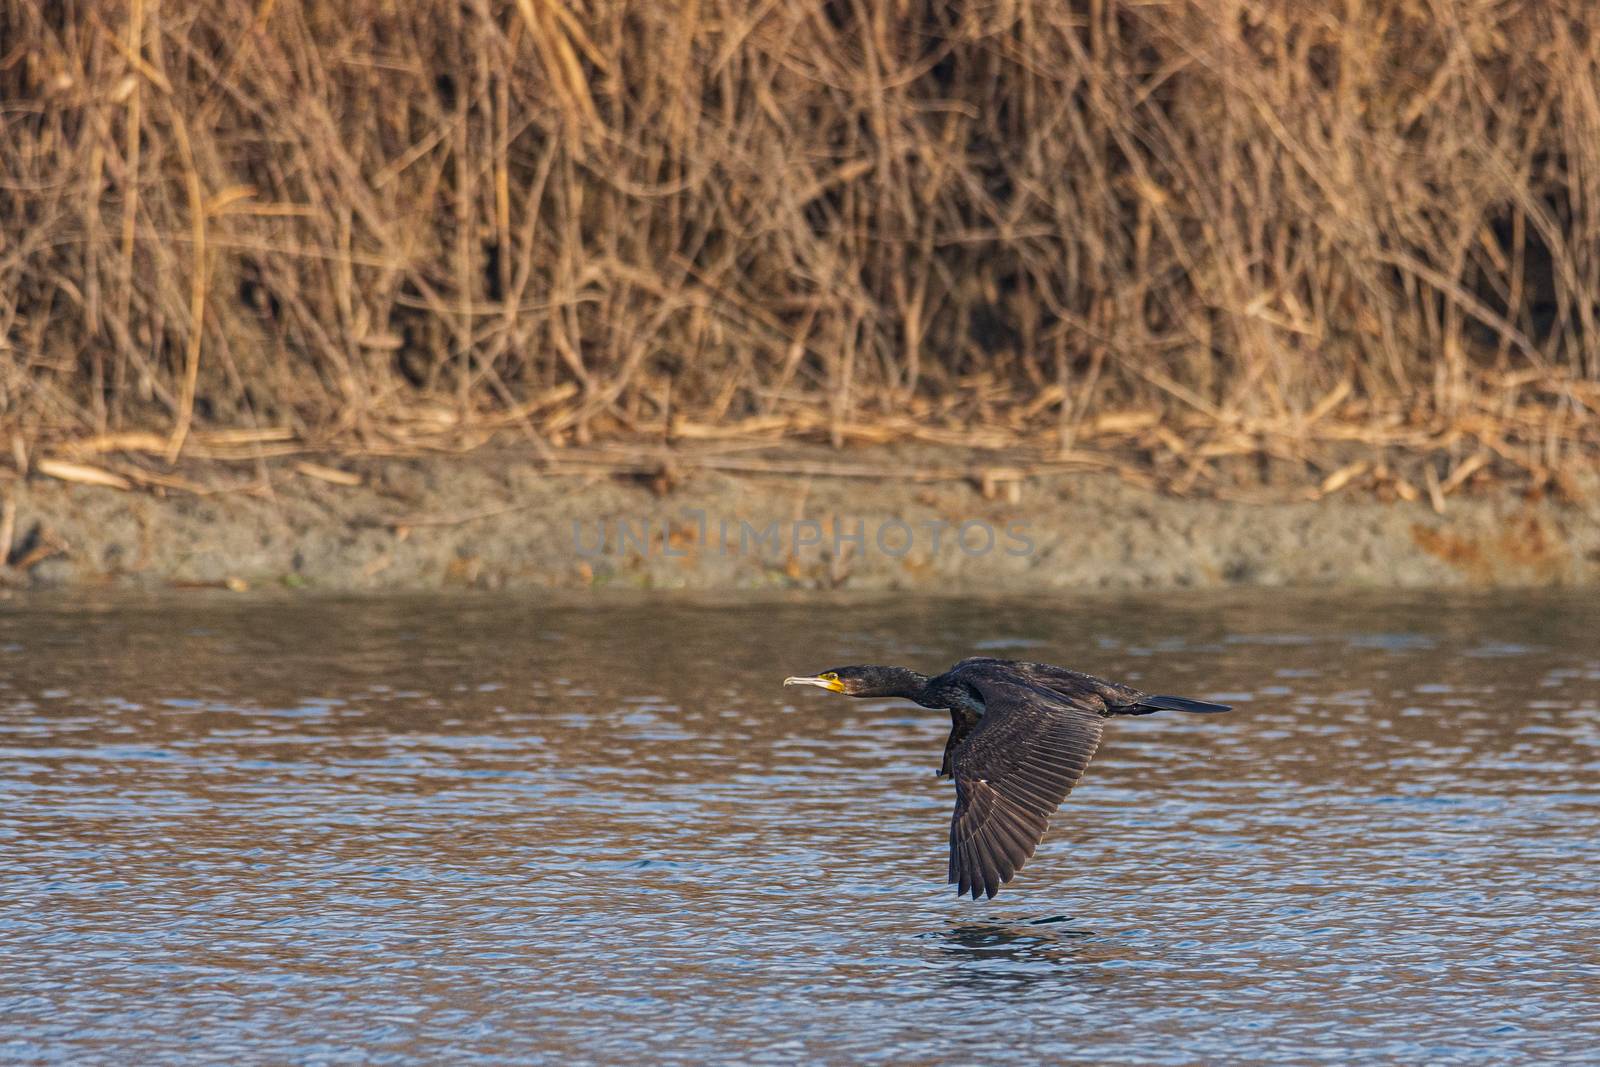 The great cormorant flies at water level over a river in the early morning, a dark-colored water bird also called great black cormorant